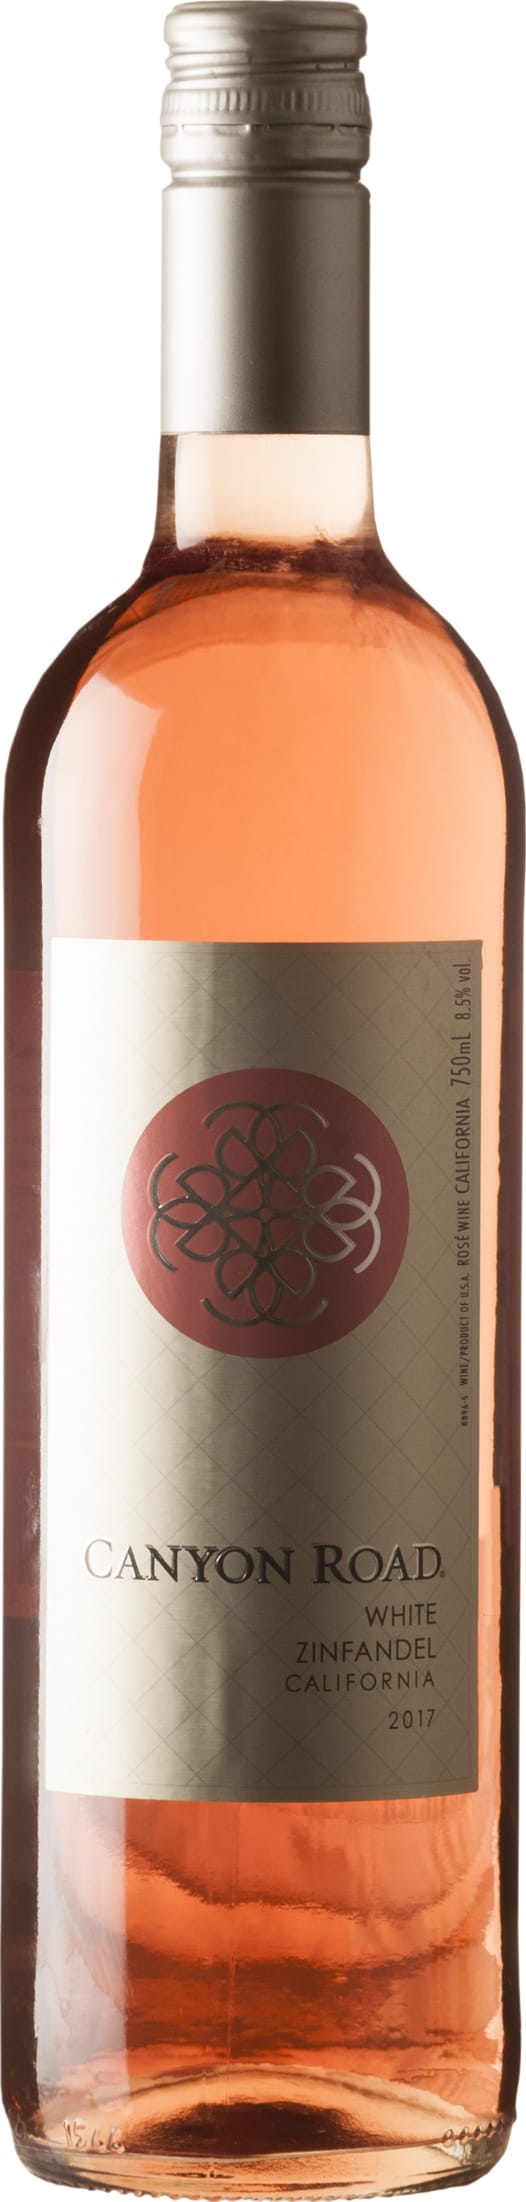 Canyon Road White Zinfandel 2020 75cl - Buy Canyon Road Wines from GREAT WINES DIRECT wine shop